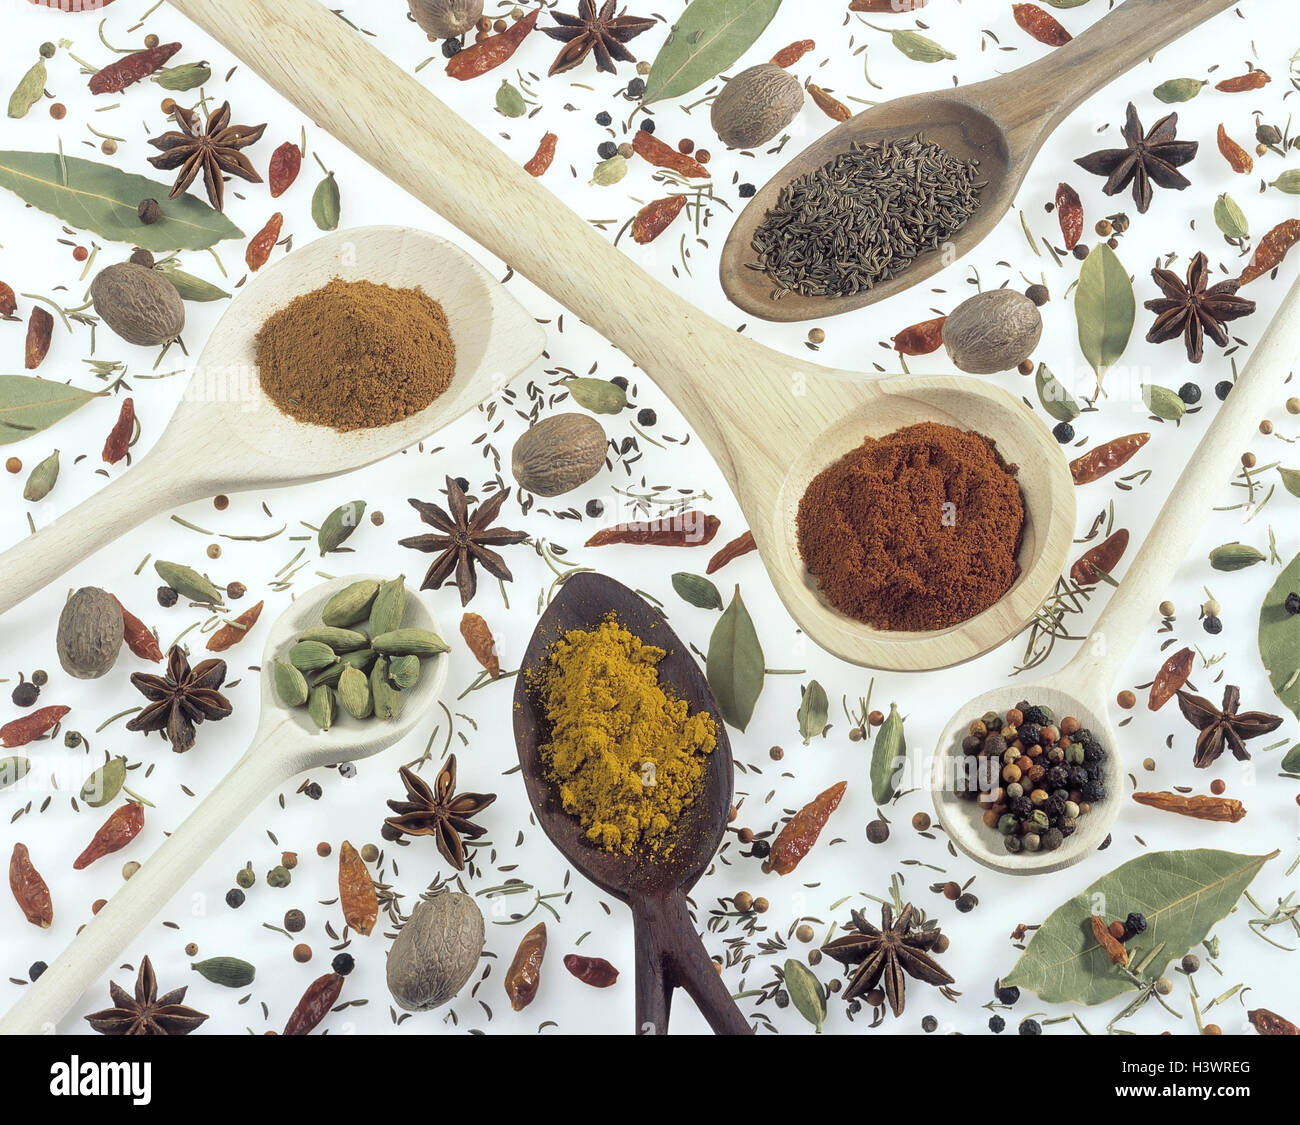 Wooden spoon, spices, differently, Still life, mustard seed, peppercorn, Kardamon, bay leaves, nutmeg, Stern's aniseed, chilli pods, curry, paprika, cinnamon, powder, ground, caraway, Würzmittel Stock Photo